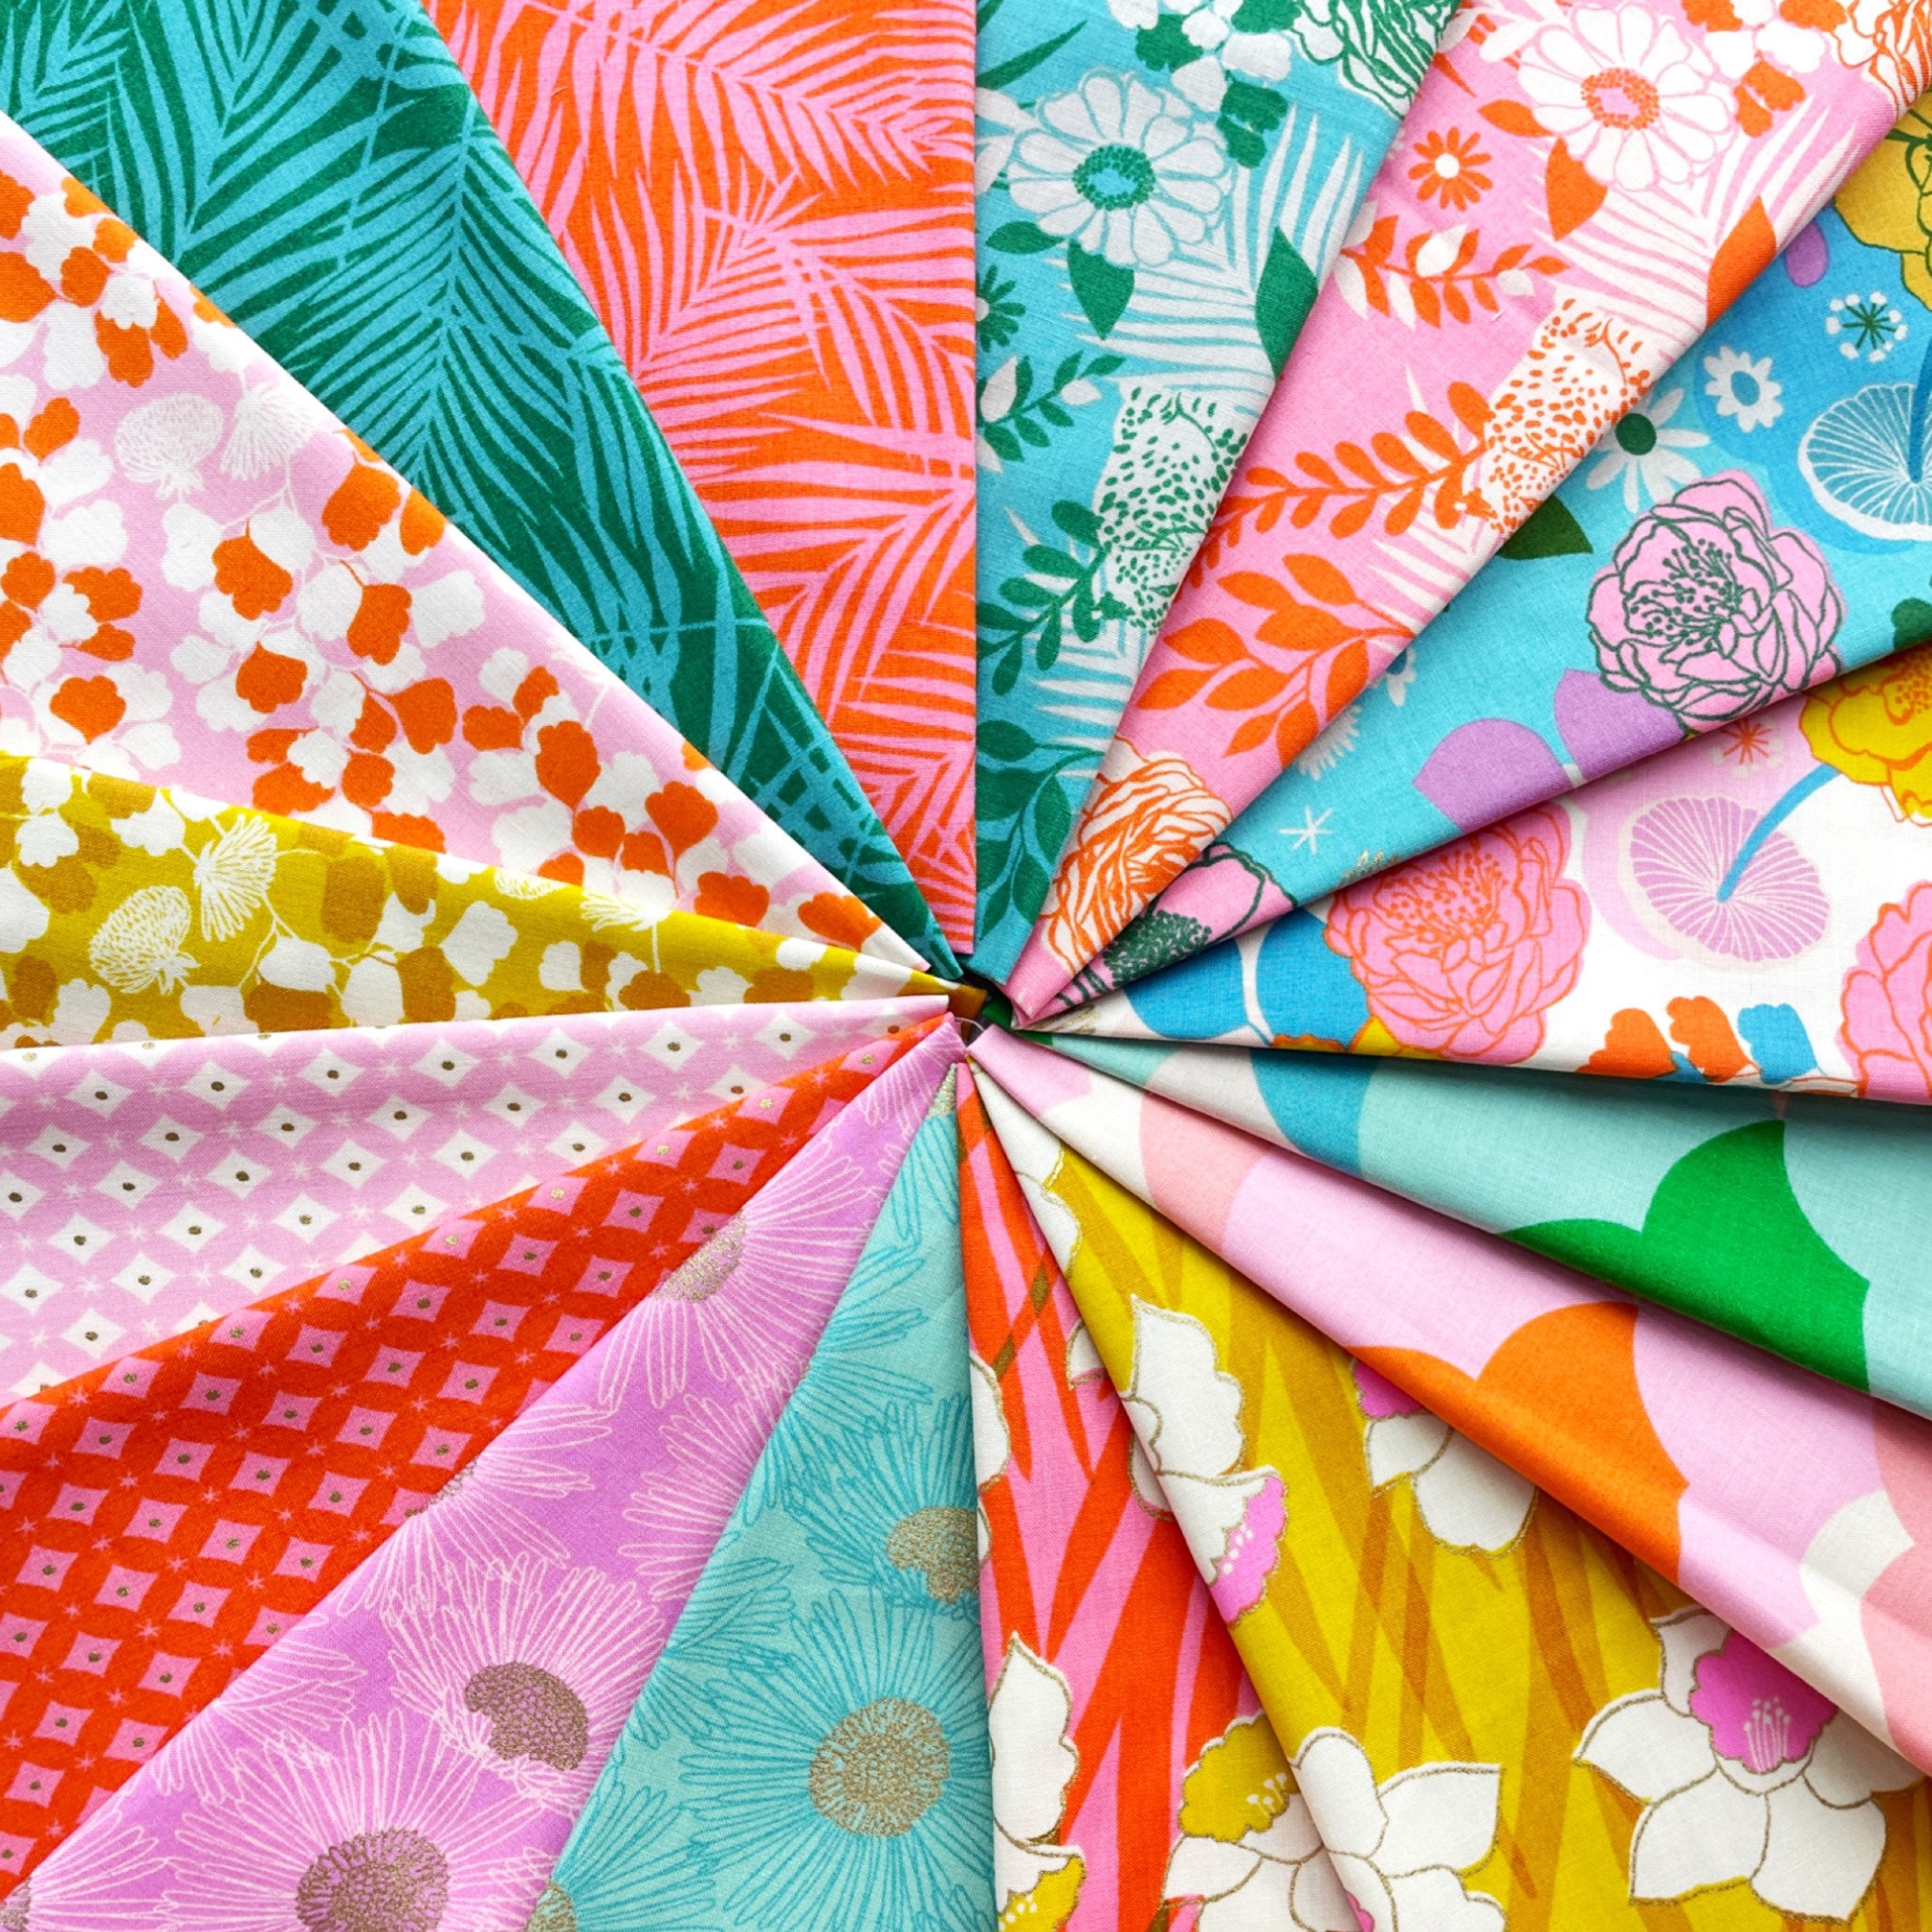 100% cotton quilting fabric available at The Fabric Fox, perfect for quilting, patchwork and dressmaking